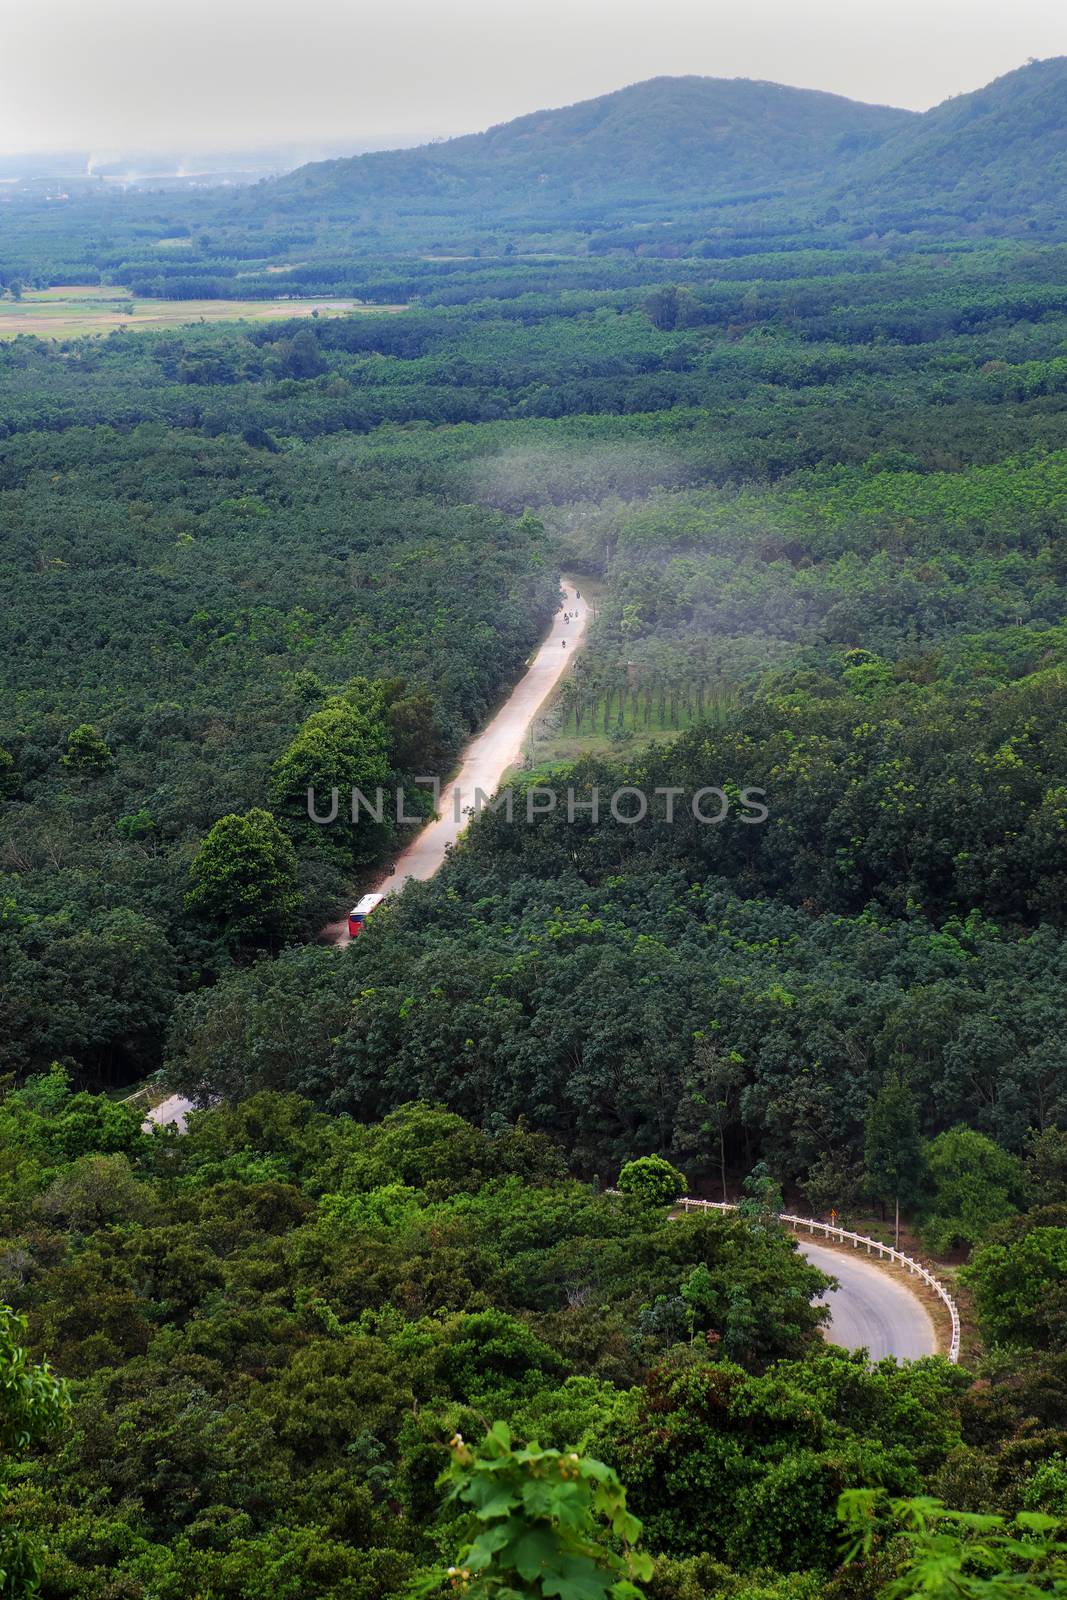 Amazing landscape from high view of road through jungle at Lam Dong, Vietnam, overview green scene with vehicle move on dust path to cross mountain pass of forest